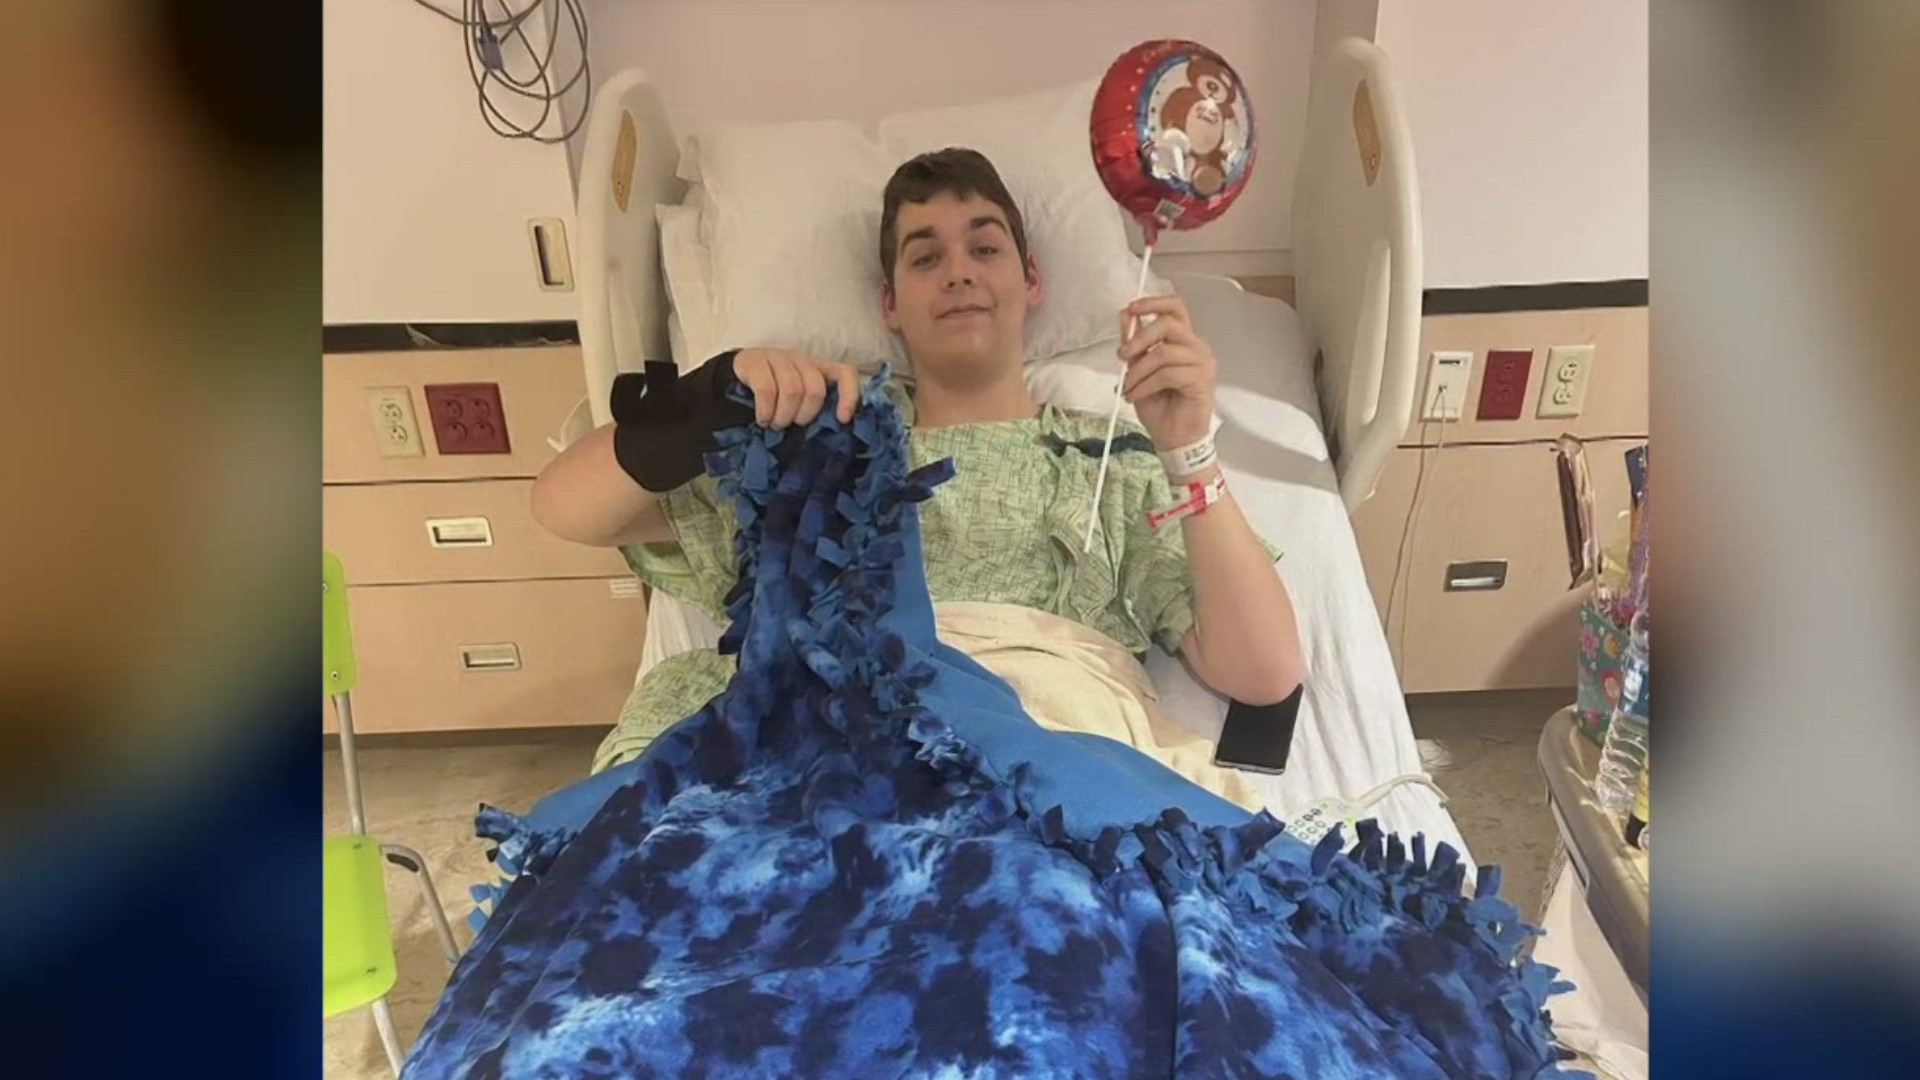 Perry High School shooting victim Corey Hoffman has a long road to recovery ahead of him.